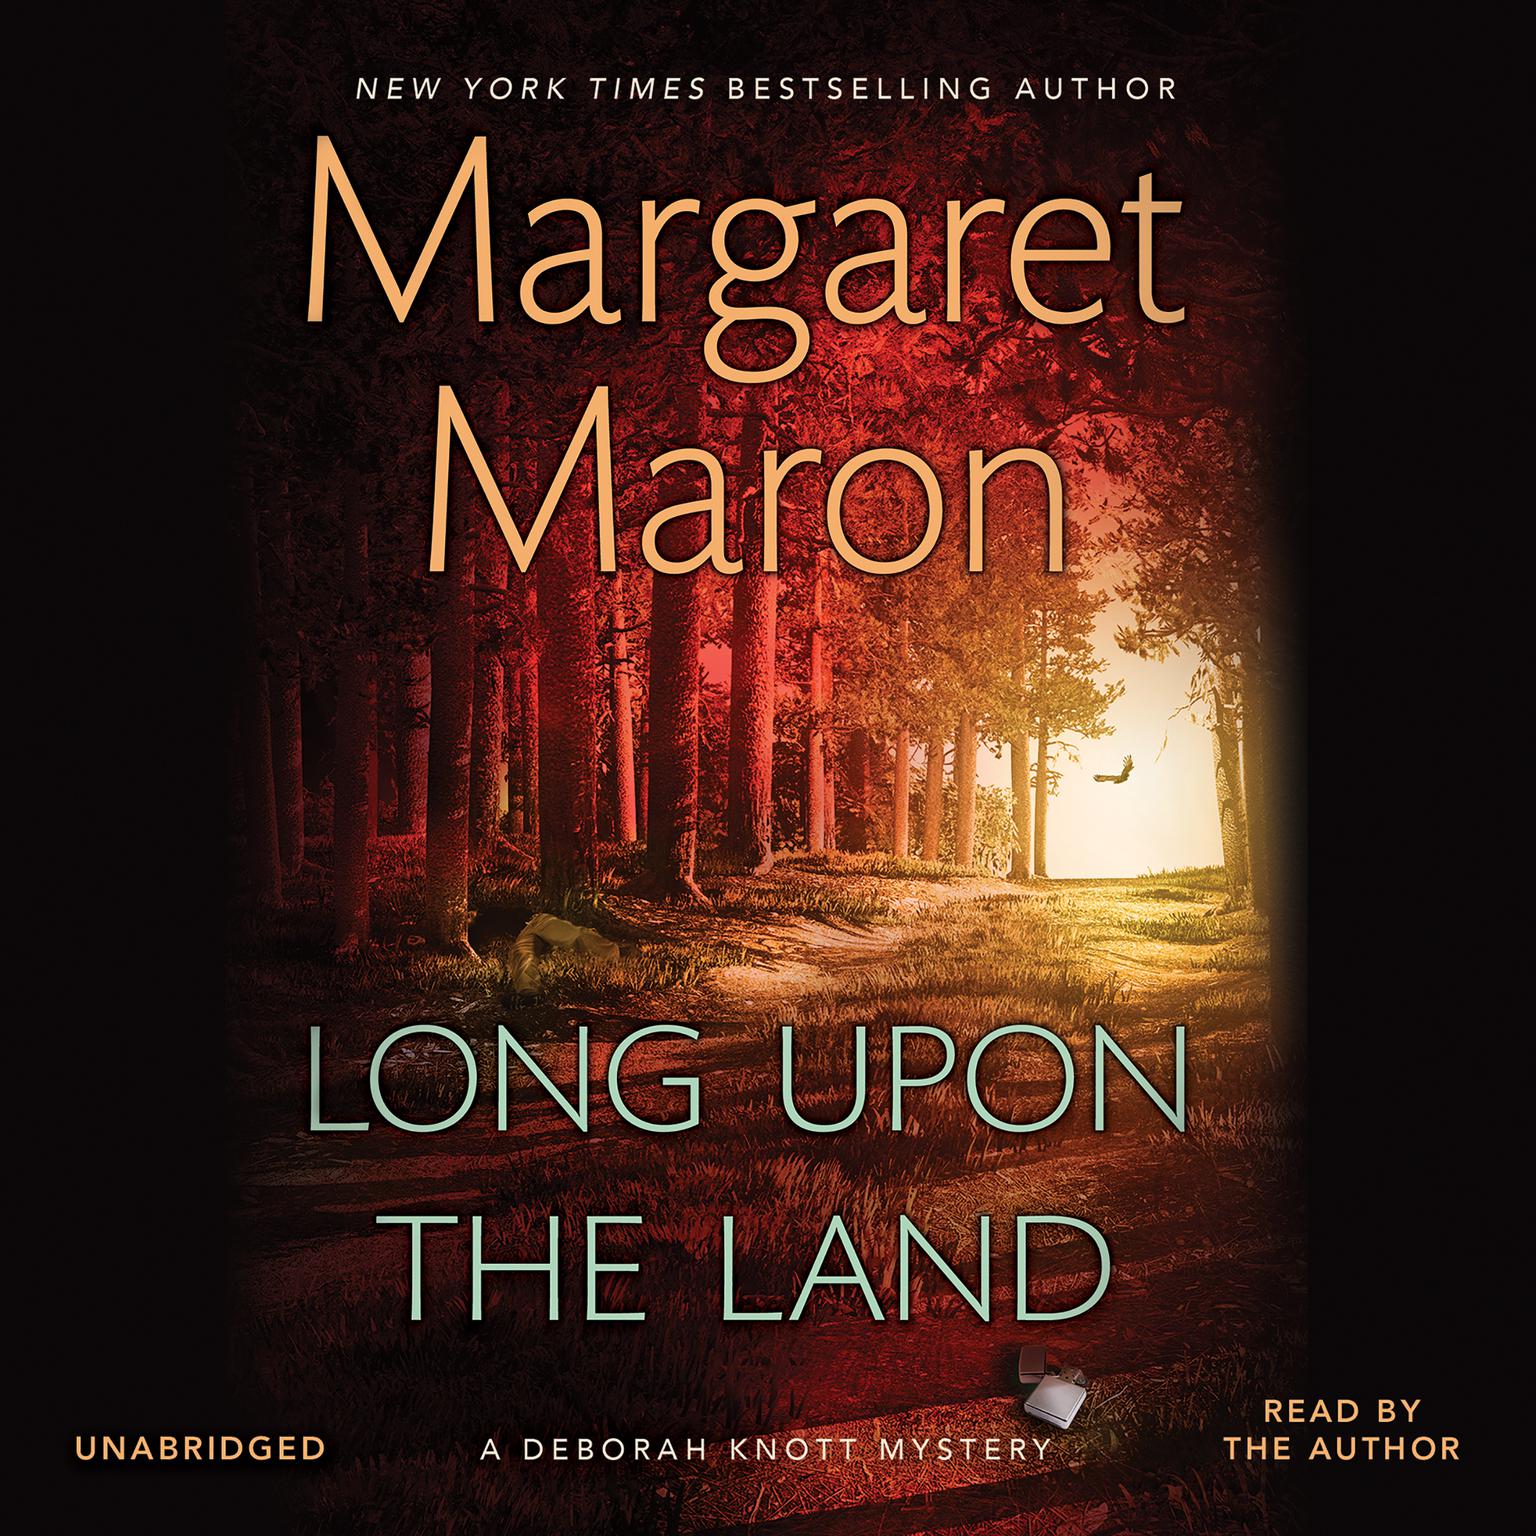 Long Upon the Land Audiobook, by Margaret Maron